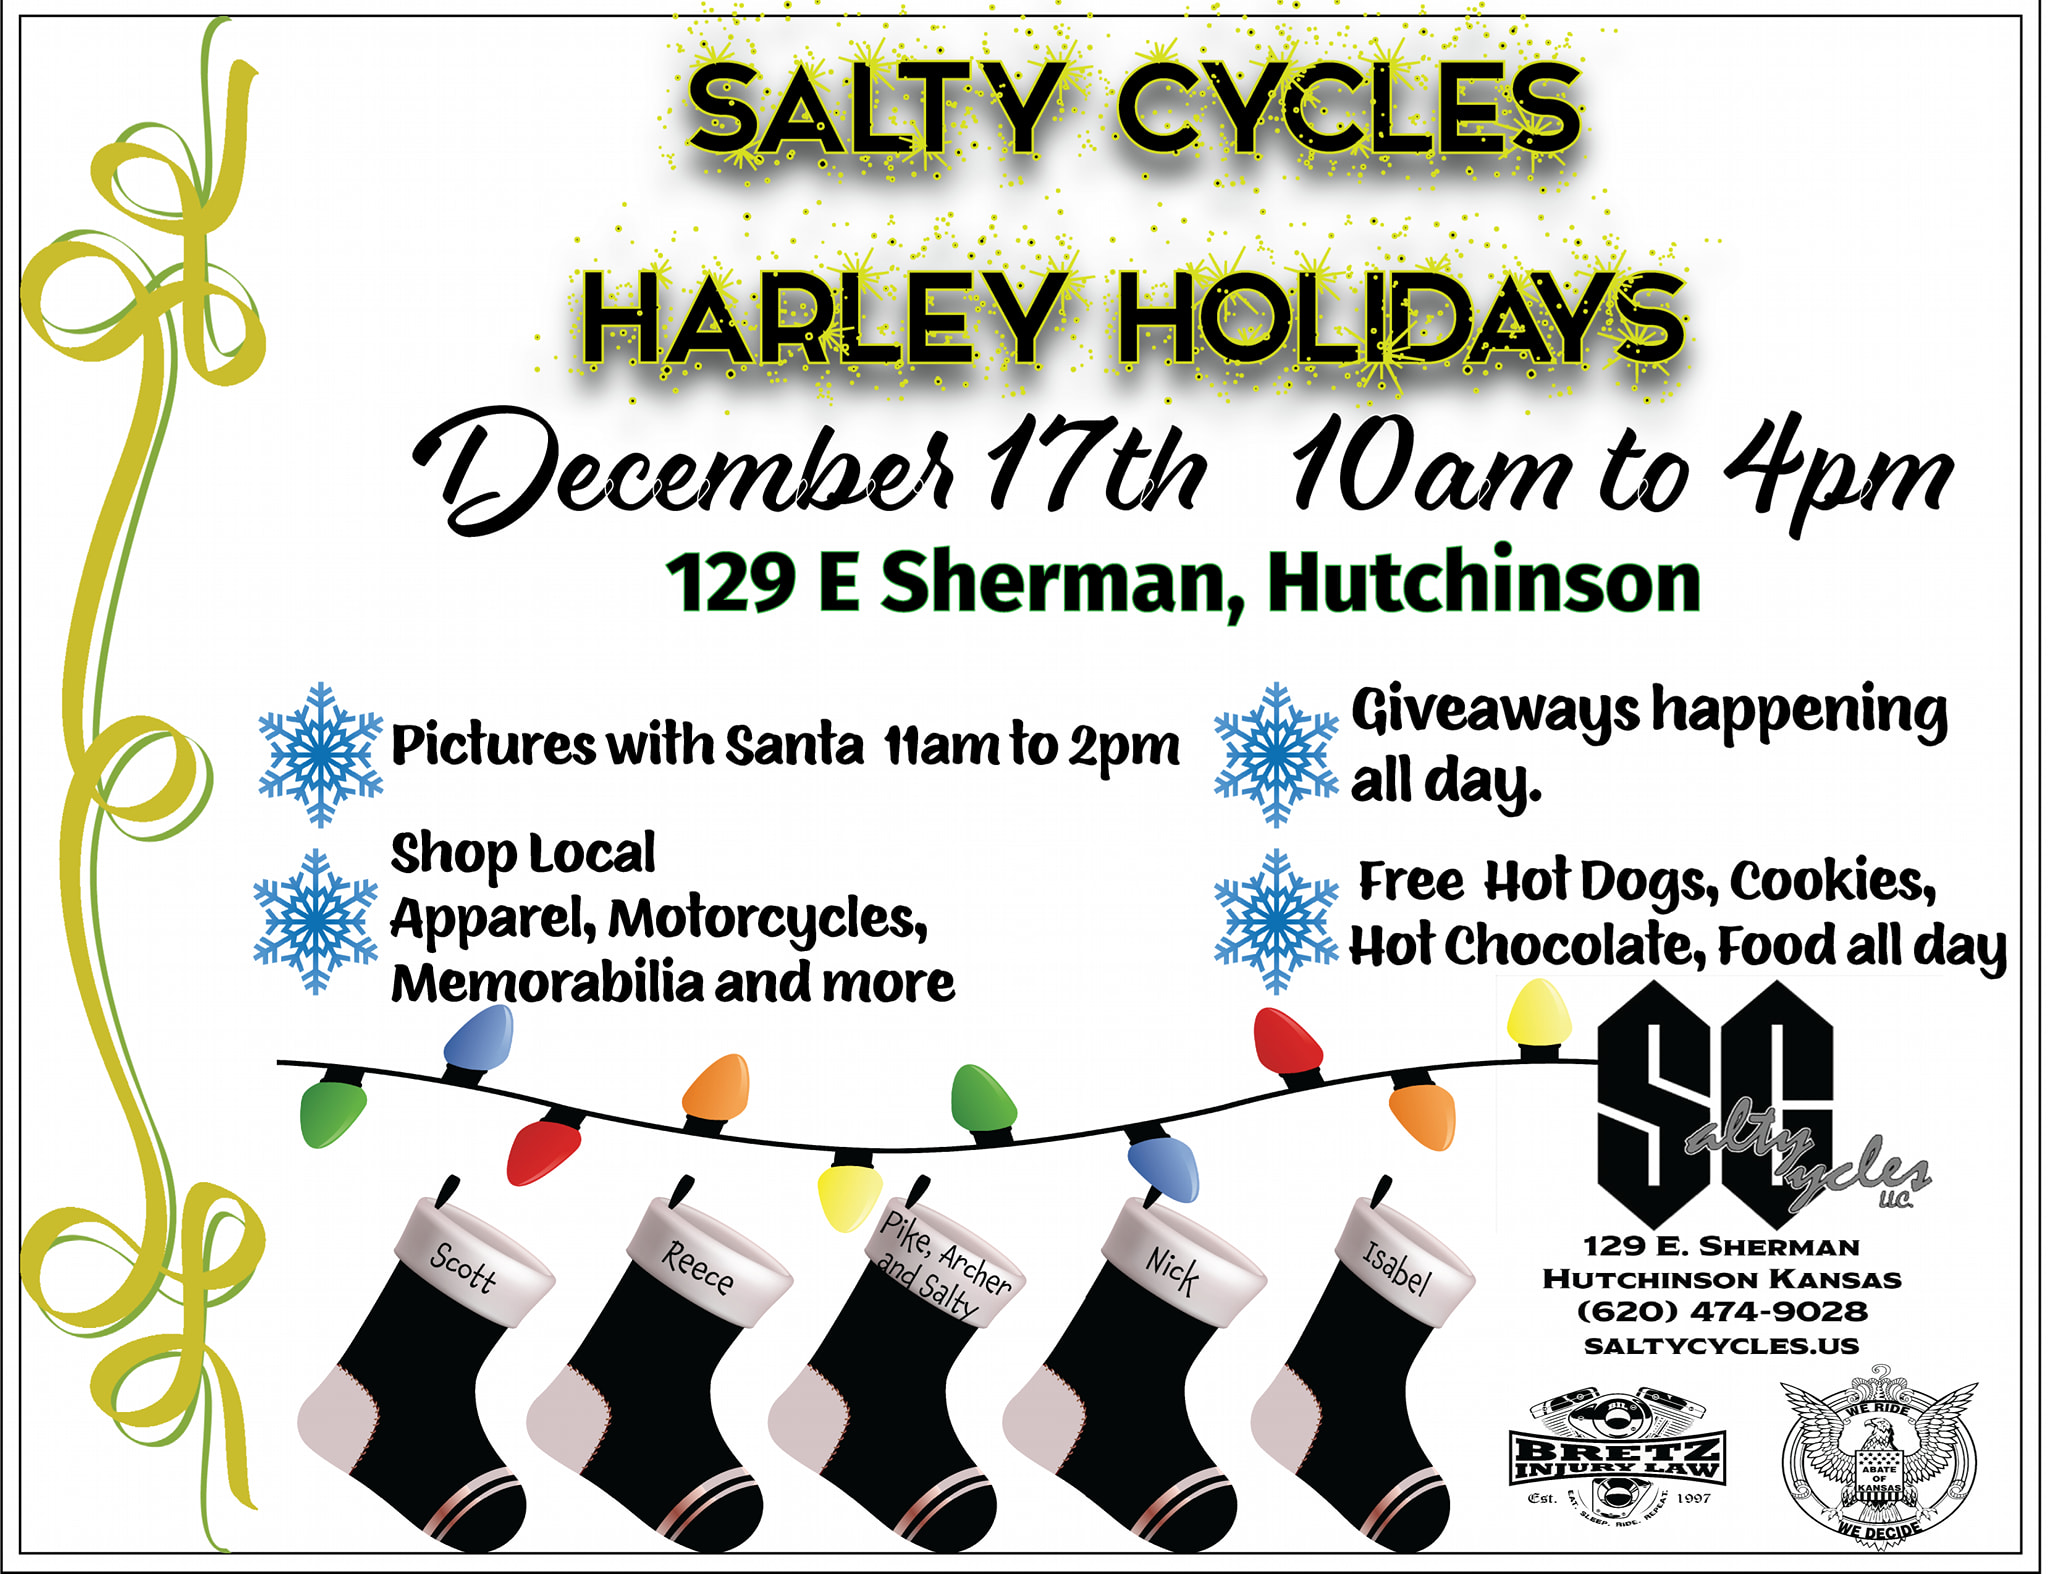 Event Promo Photo For Harley Holidays at Salty Cycles